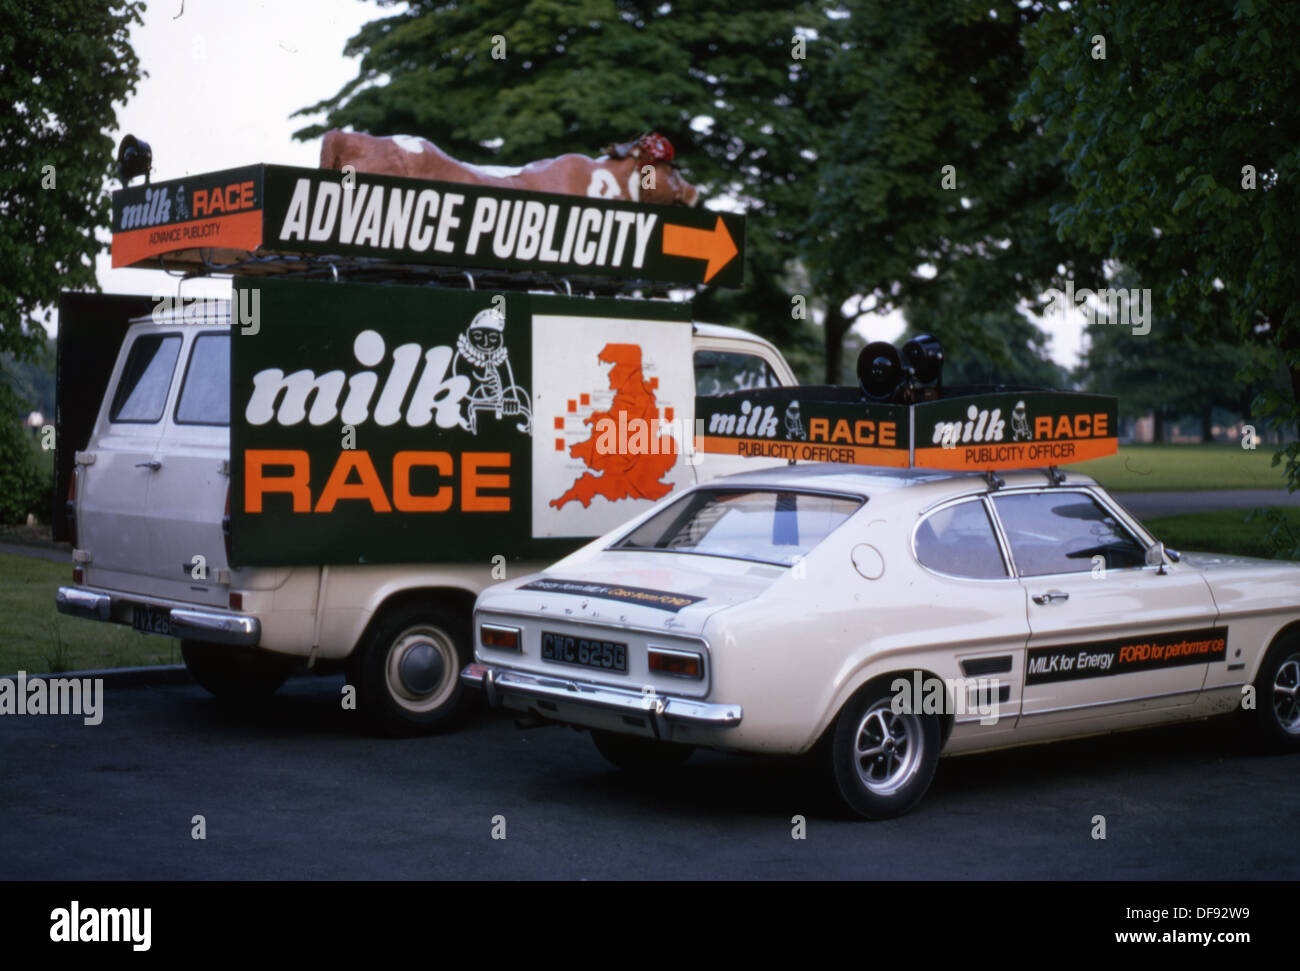 1980, picture of two advance publicity vehicles for the British nationwide road cycling event, The Milk Race, a famous event first started in 1958. Stock Photo